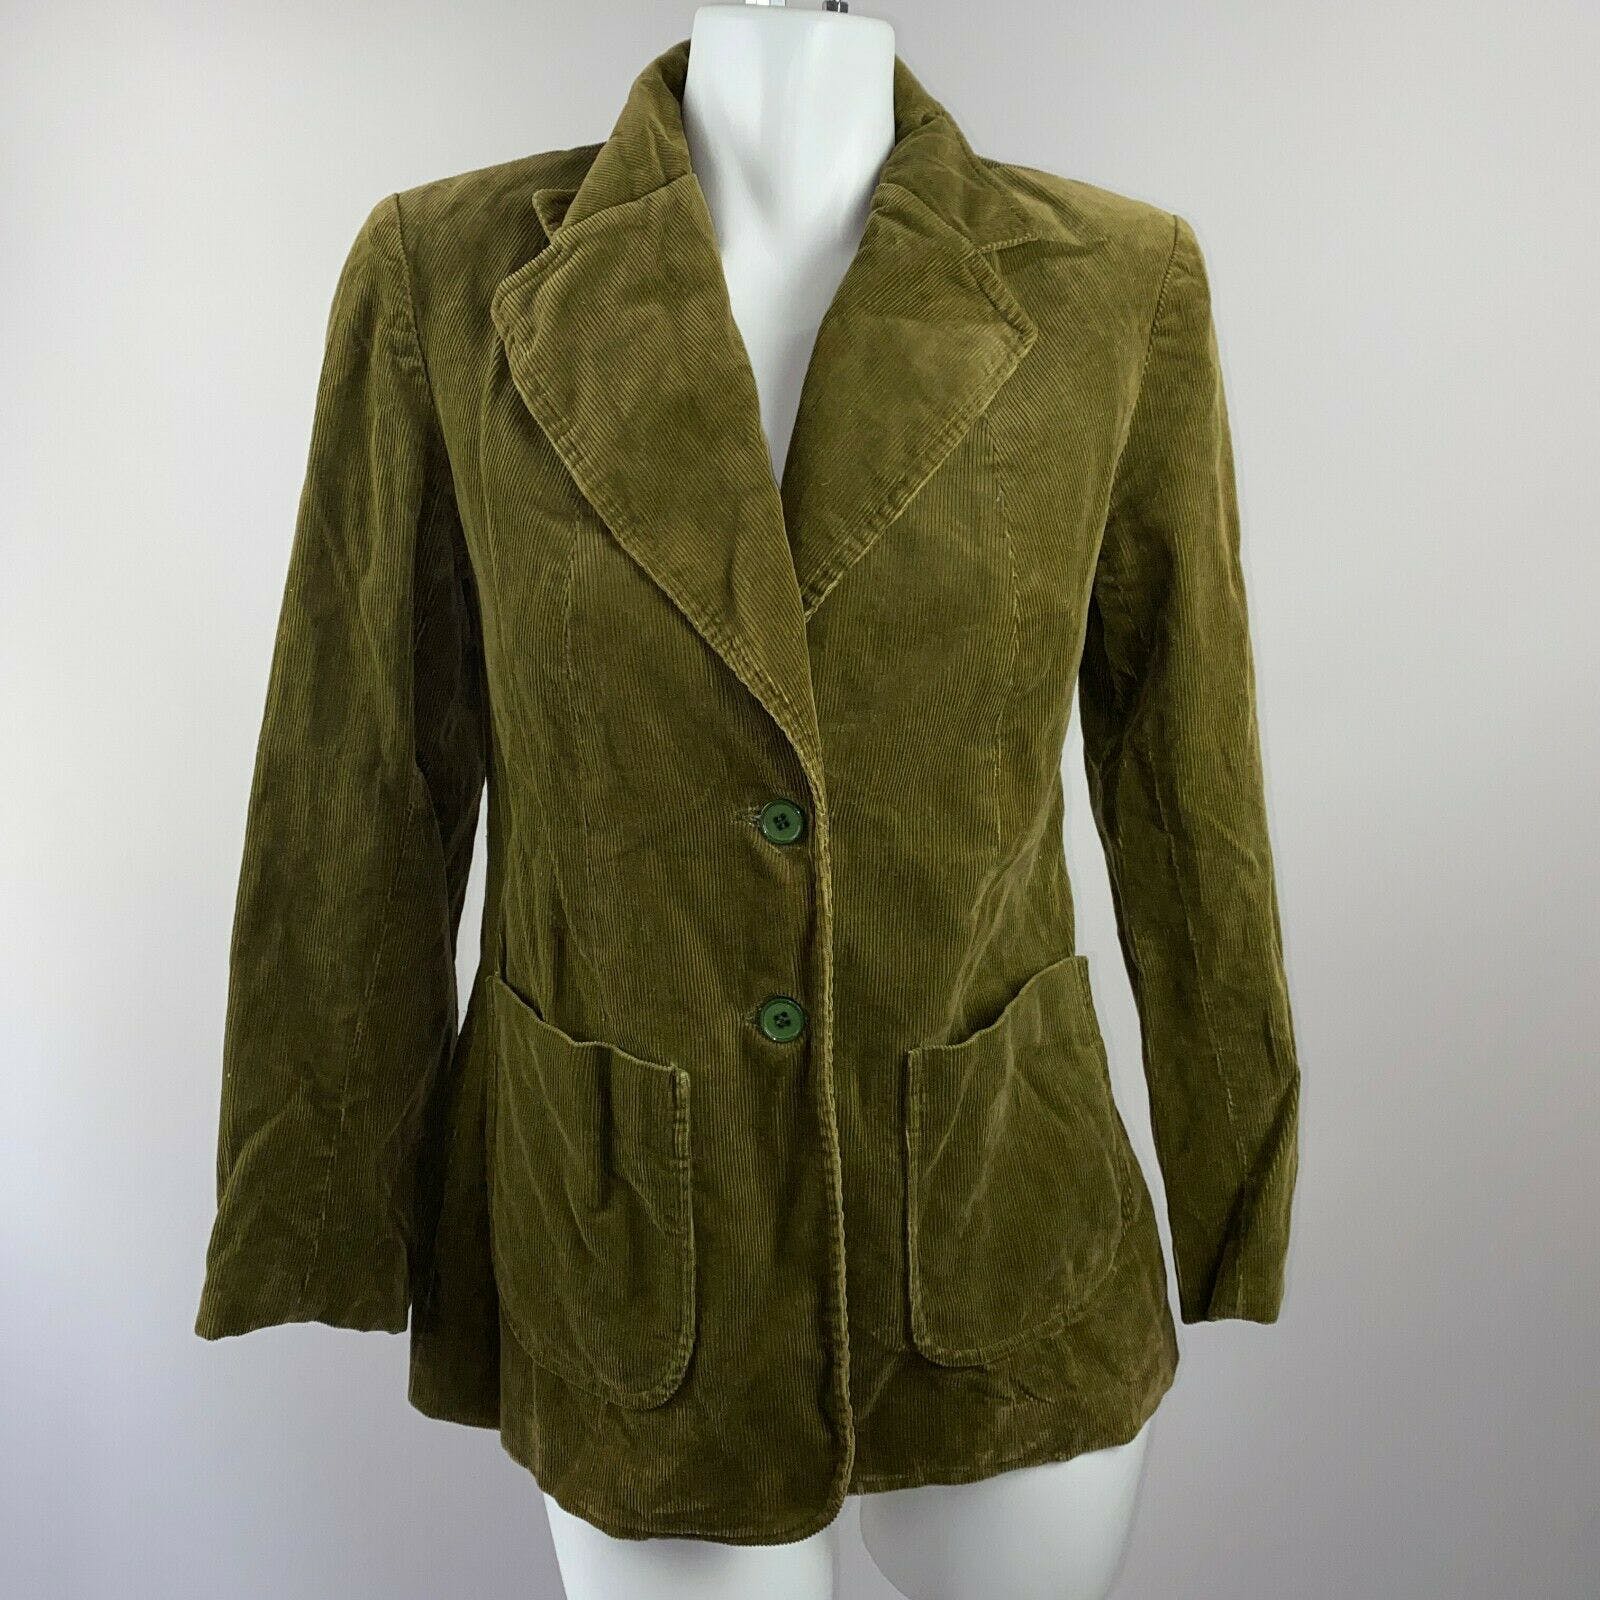 Vintage 60's Olive Green Corduroy Jacket by Bambergers - Free Shipping ...